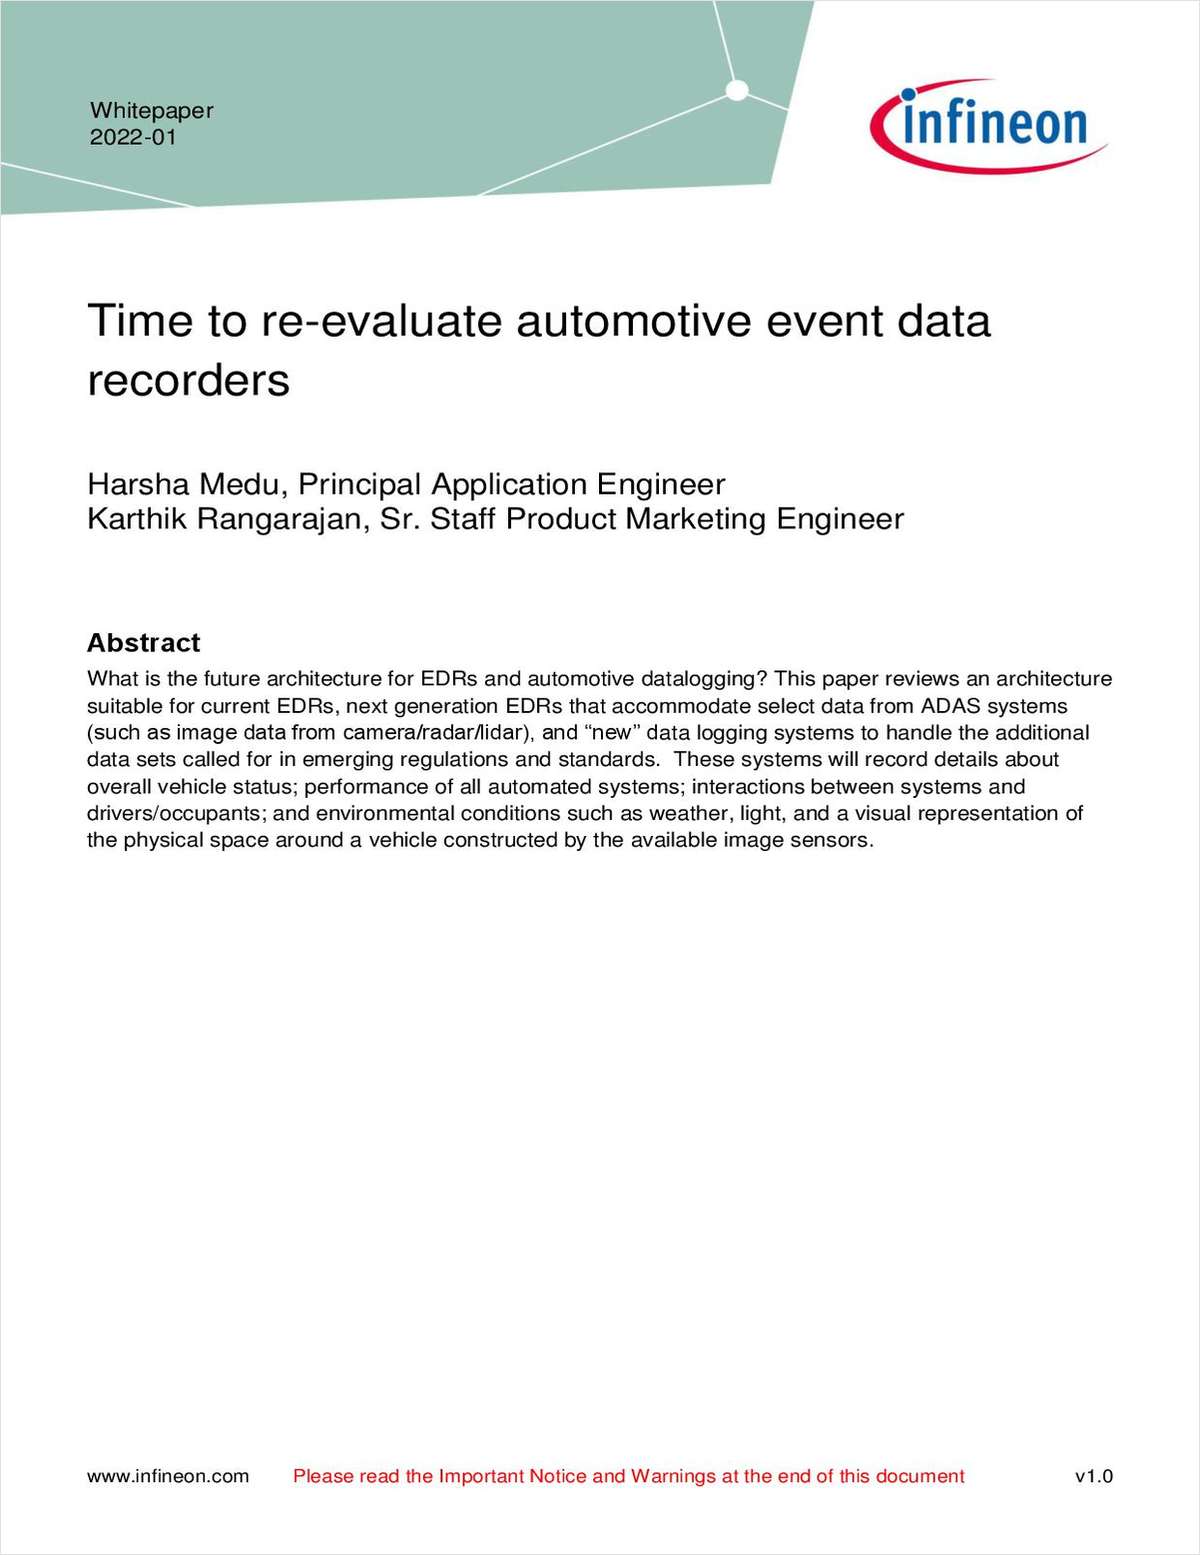 Time to re-evaluate automotive event data recorders